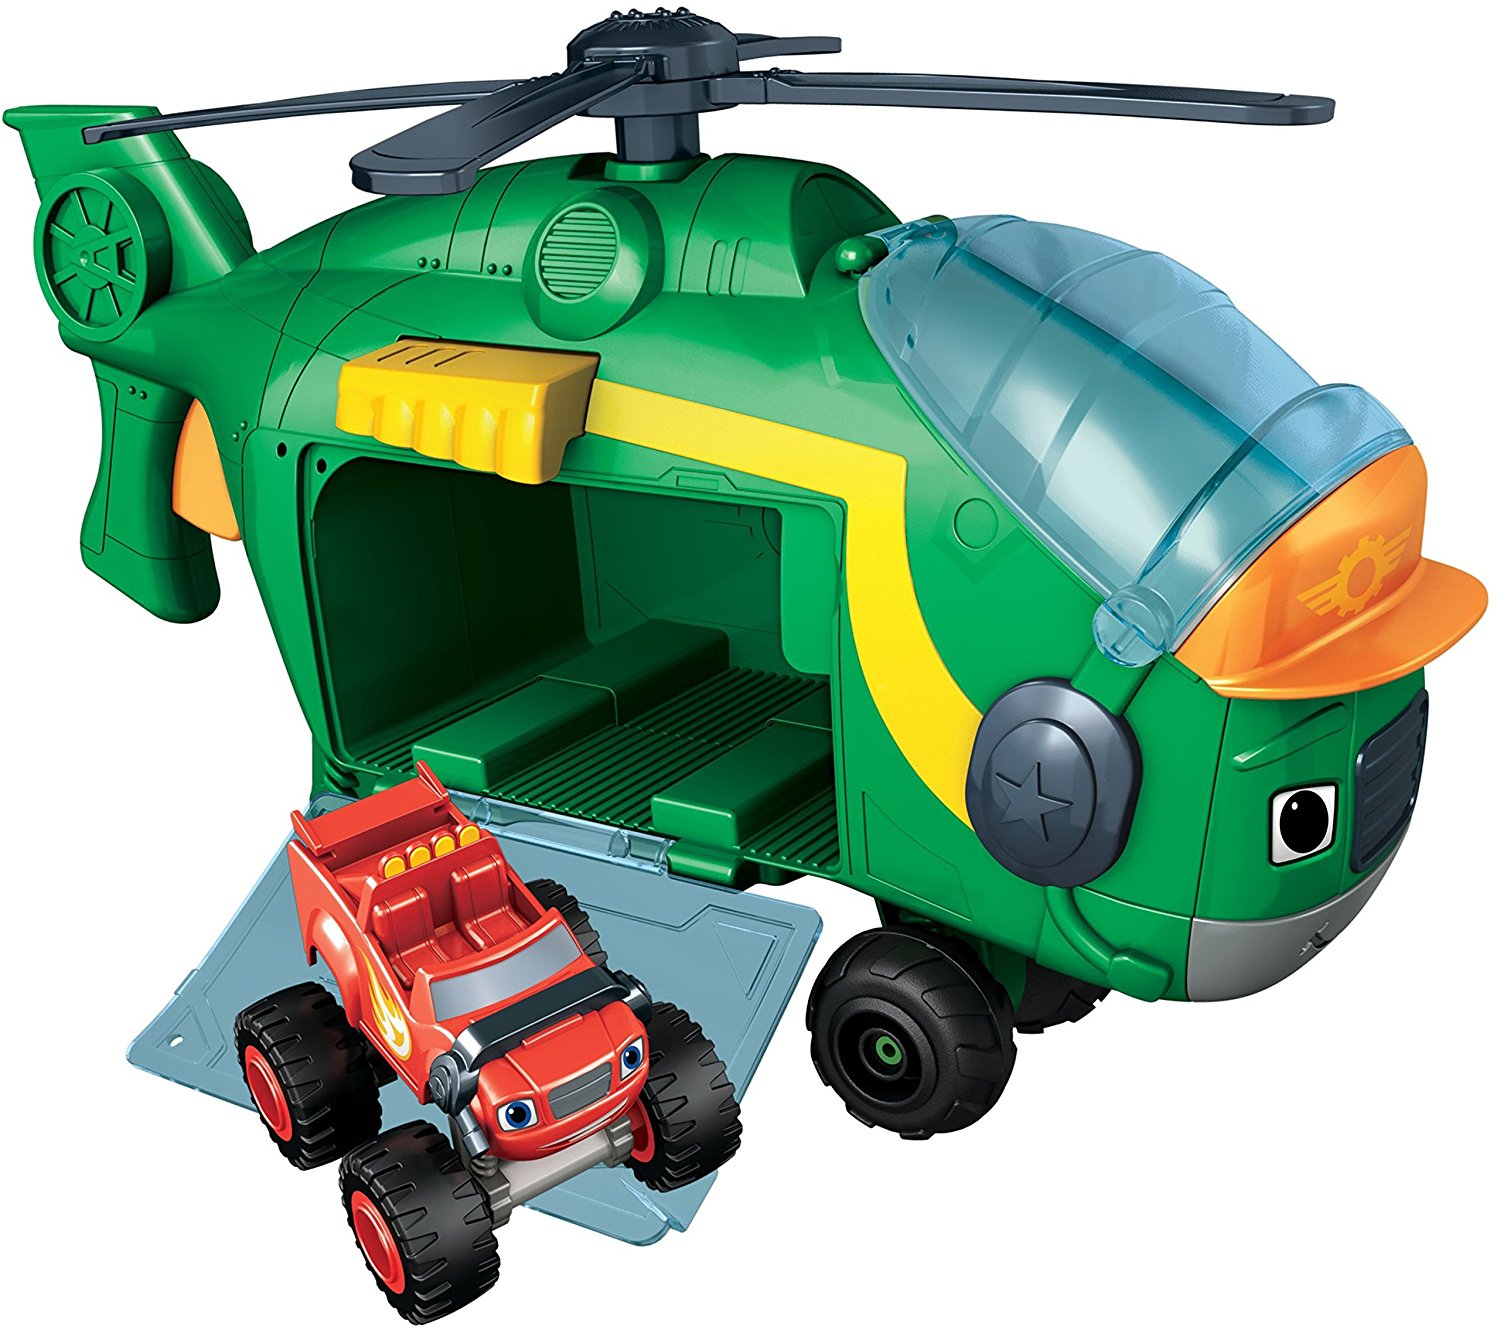 blaze-the-monster-machines-monster-copter-swoops-only-13-99-reg